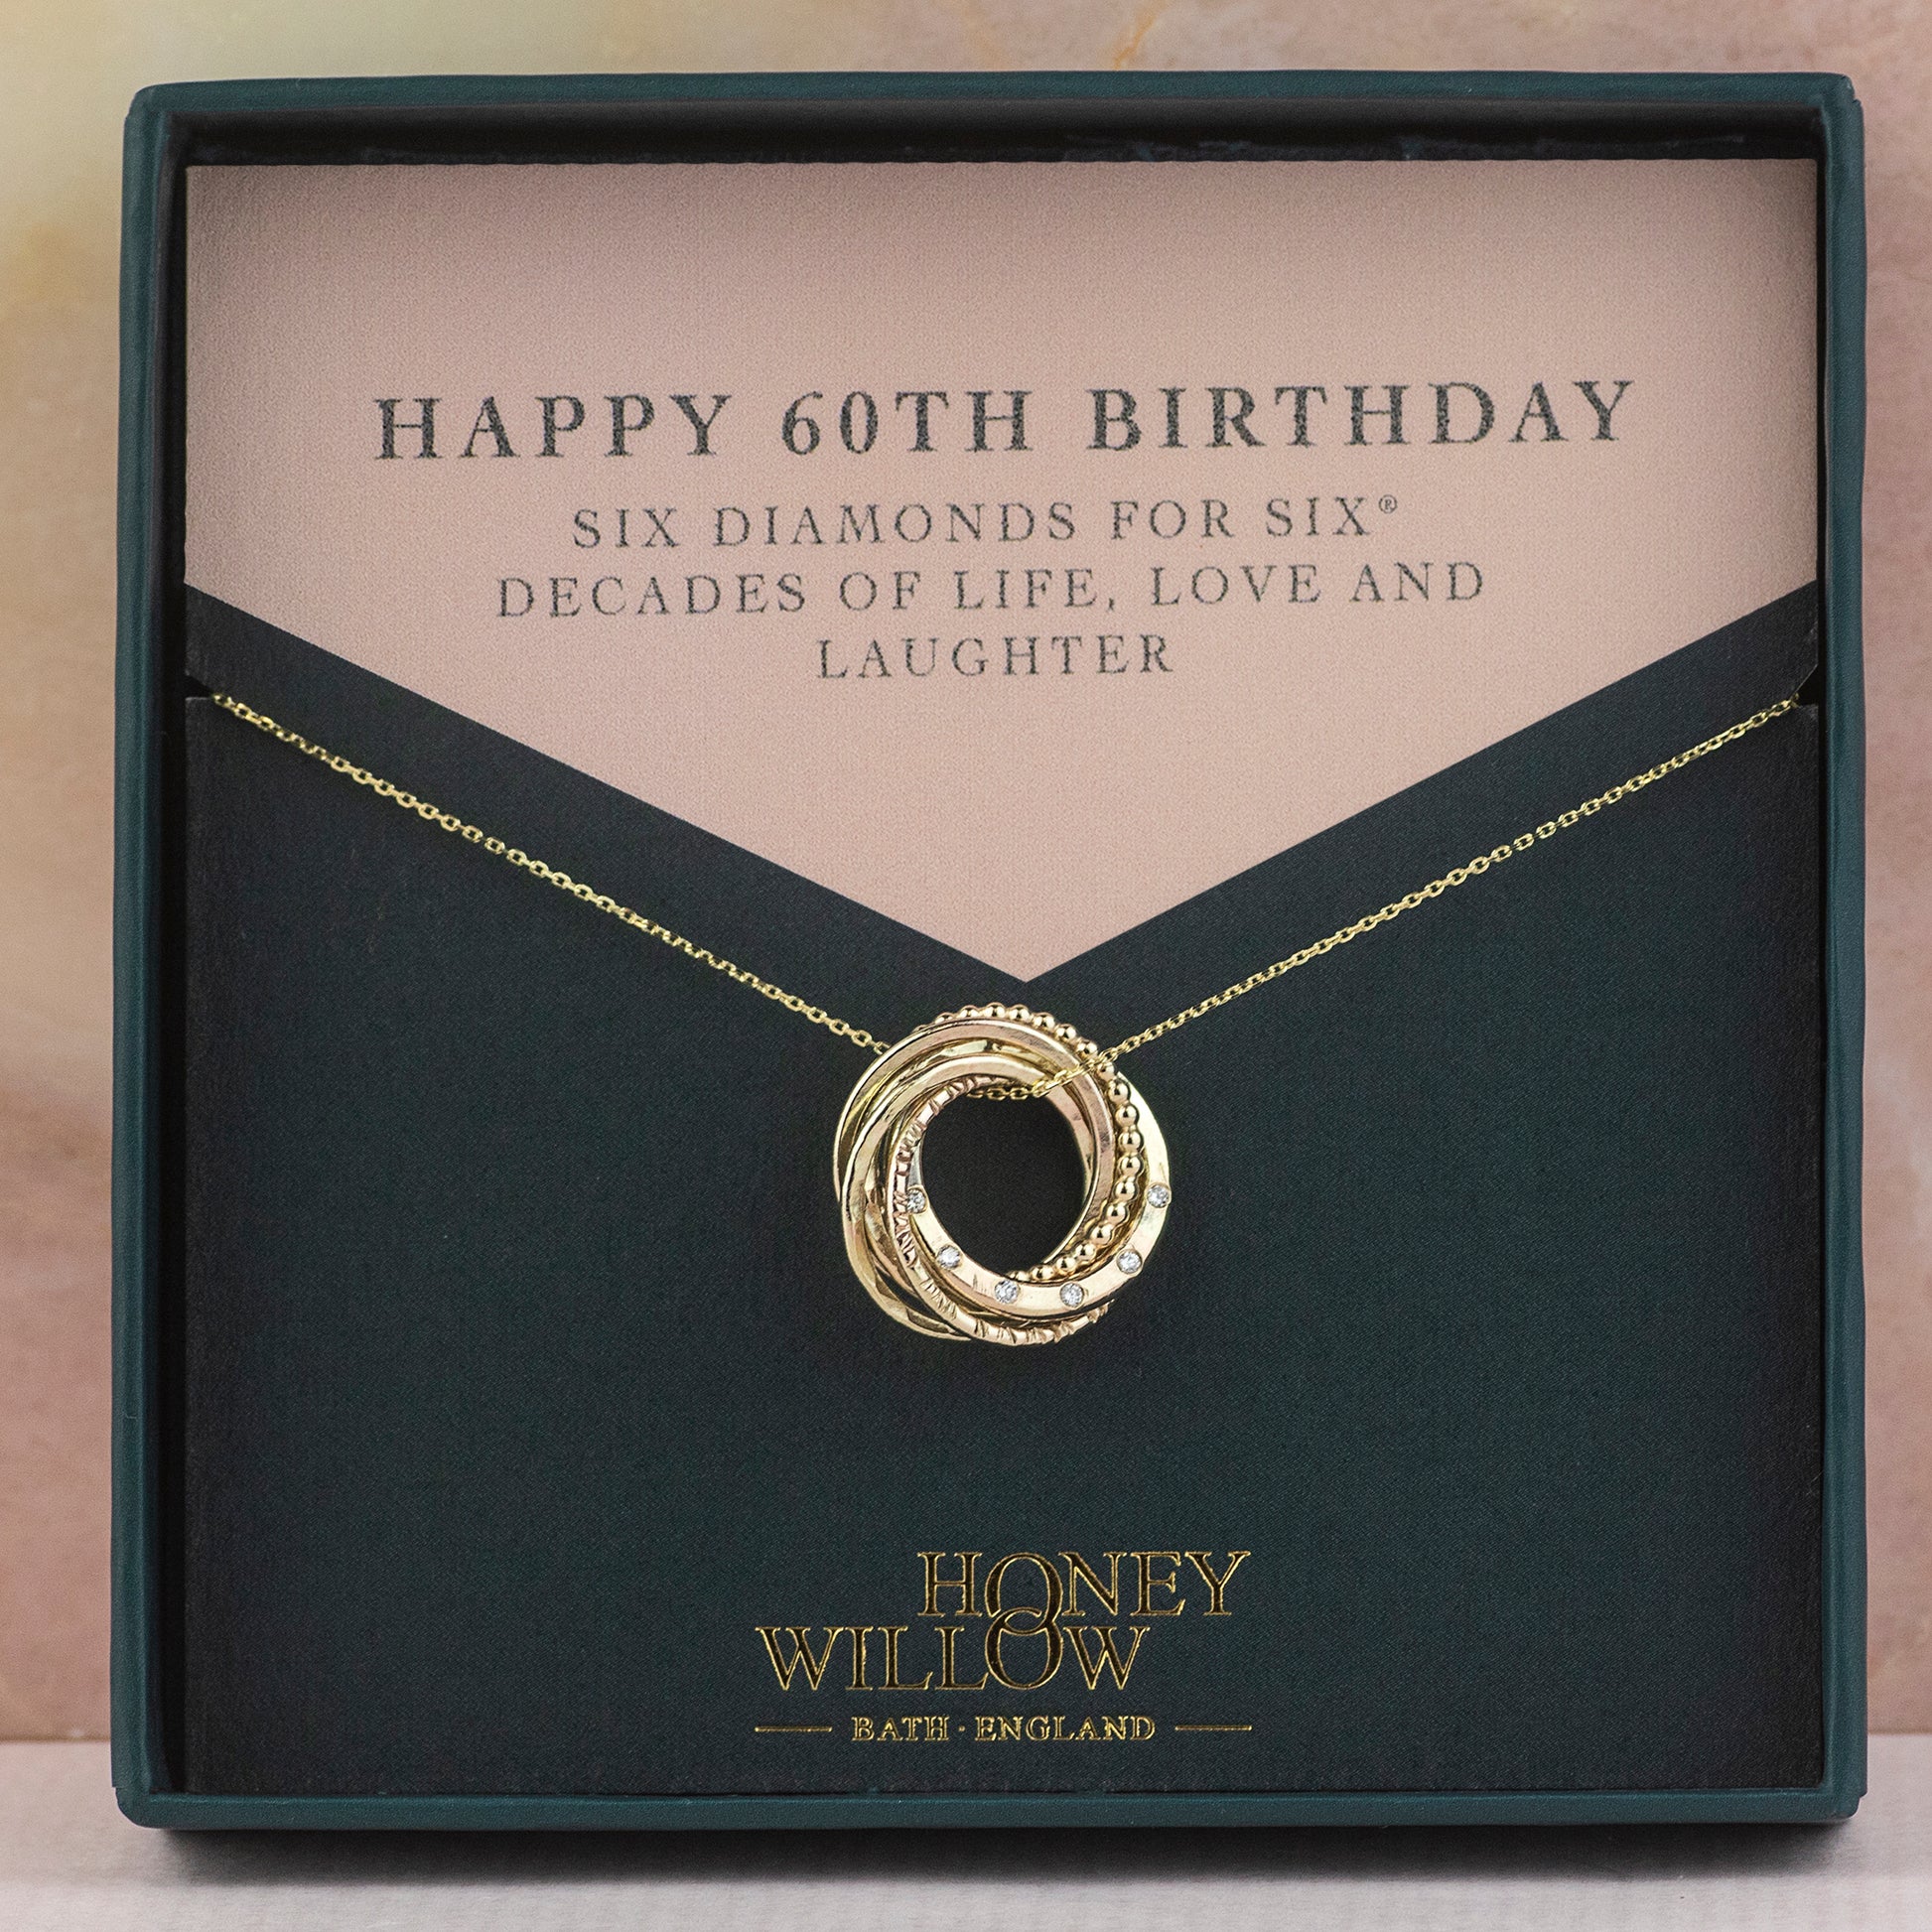 9kt 60th Birthday Necklace - 6 Diamonds for 6 Decades Necklace - Recycled Gold, Rose Gold & Silver